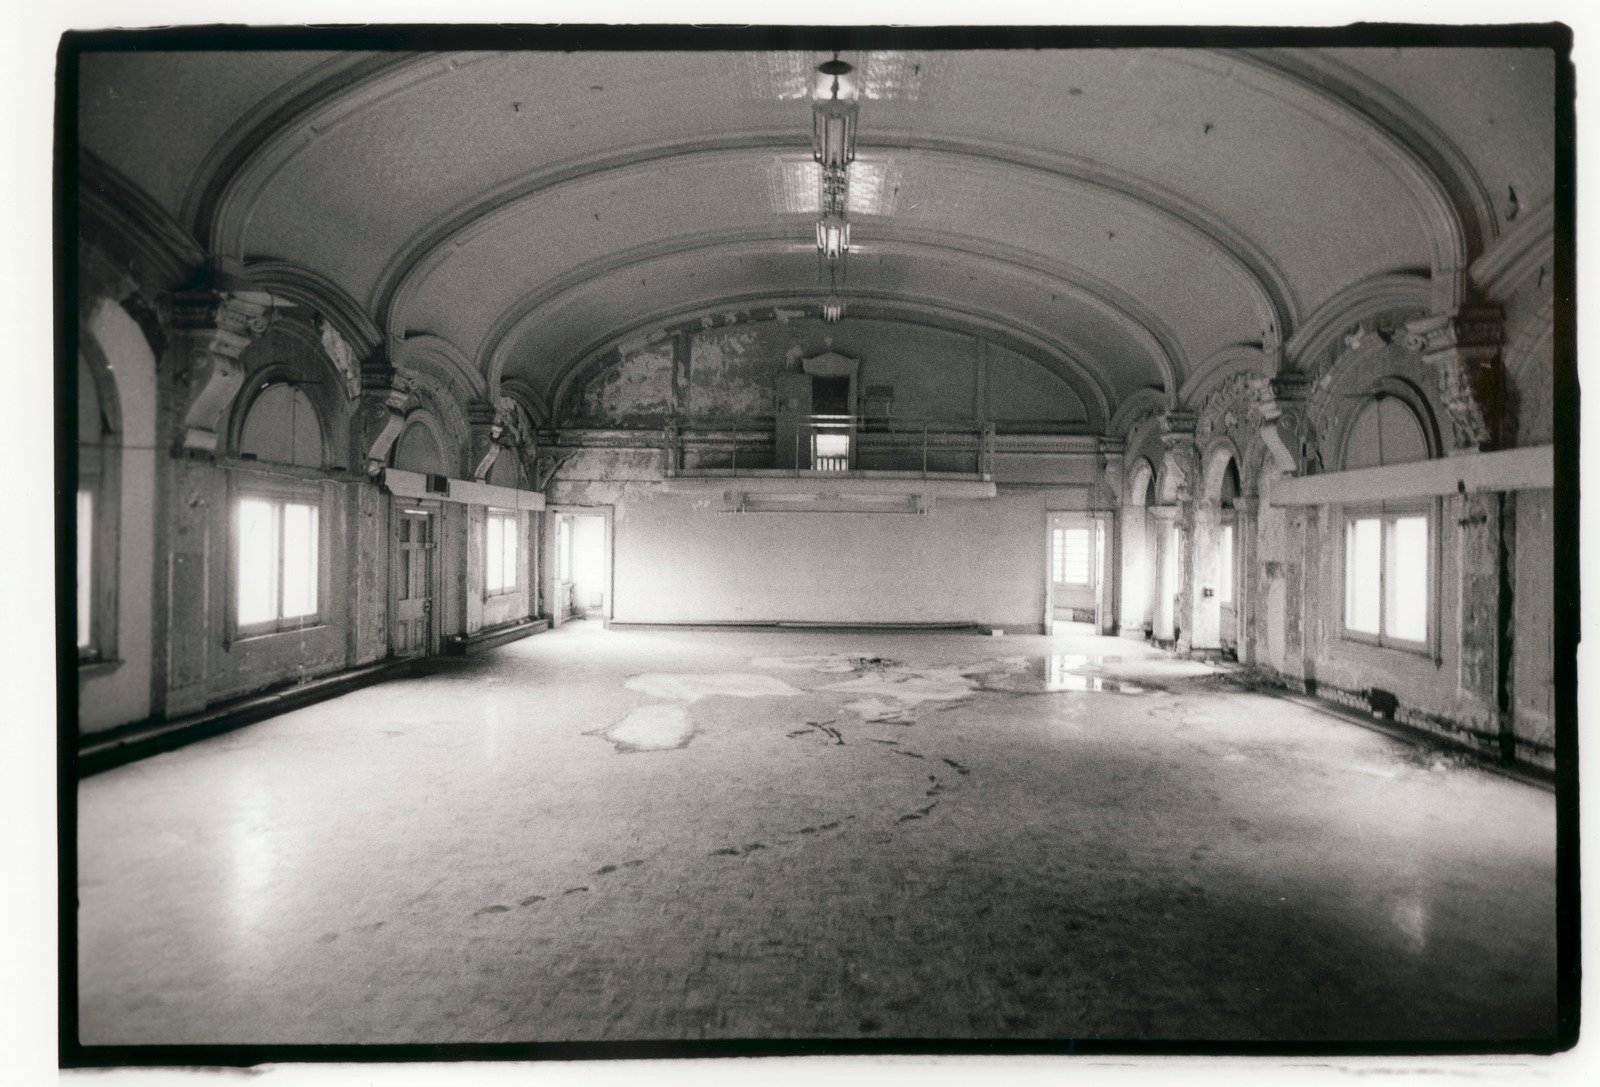 State Library Victoria Dancing Above The Tracks The Vri Ballroom At